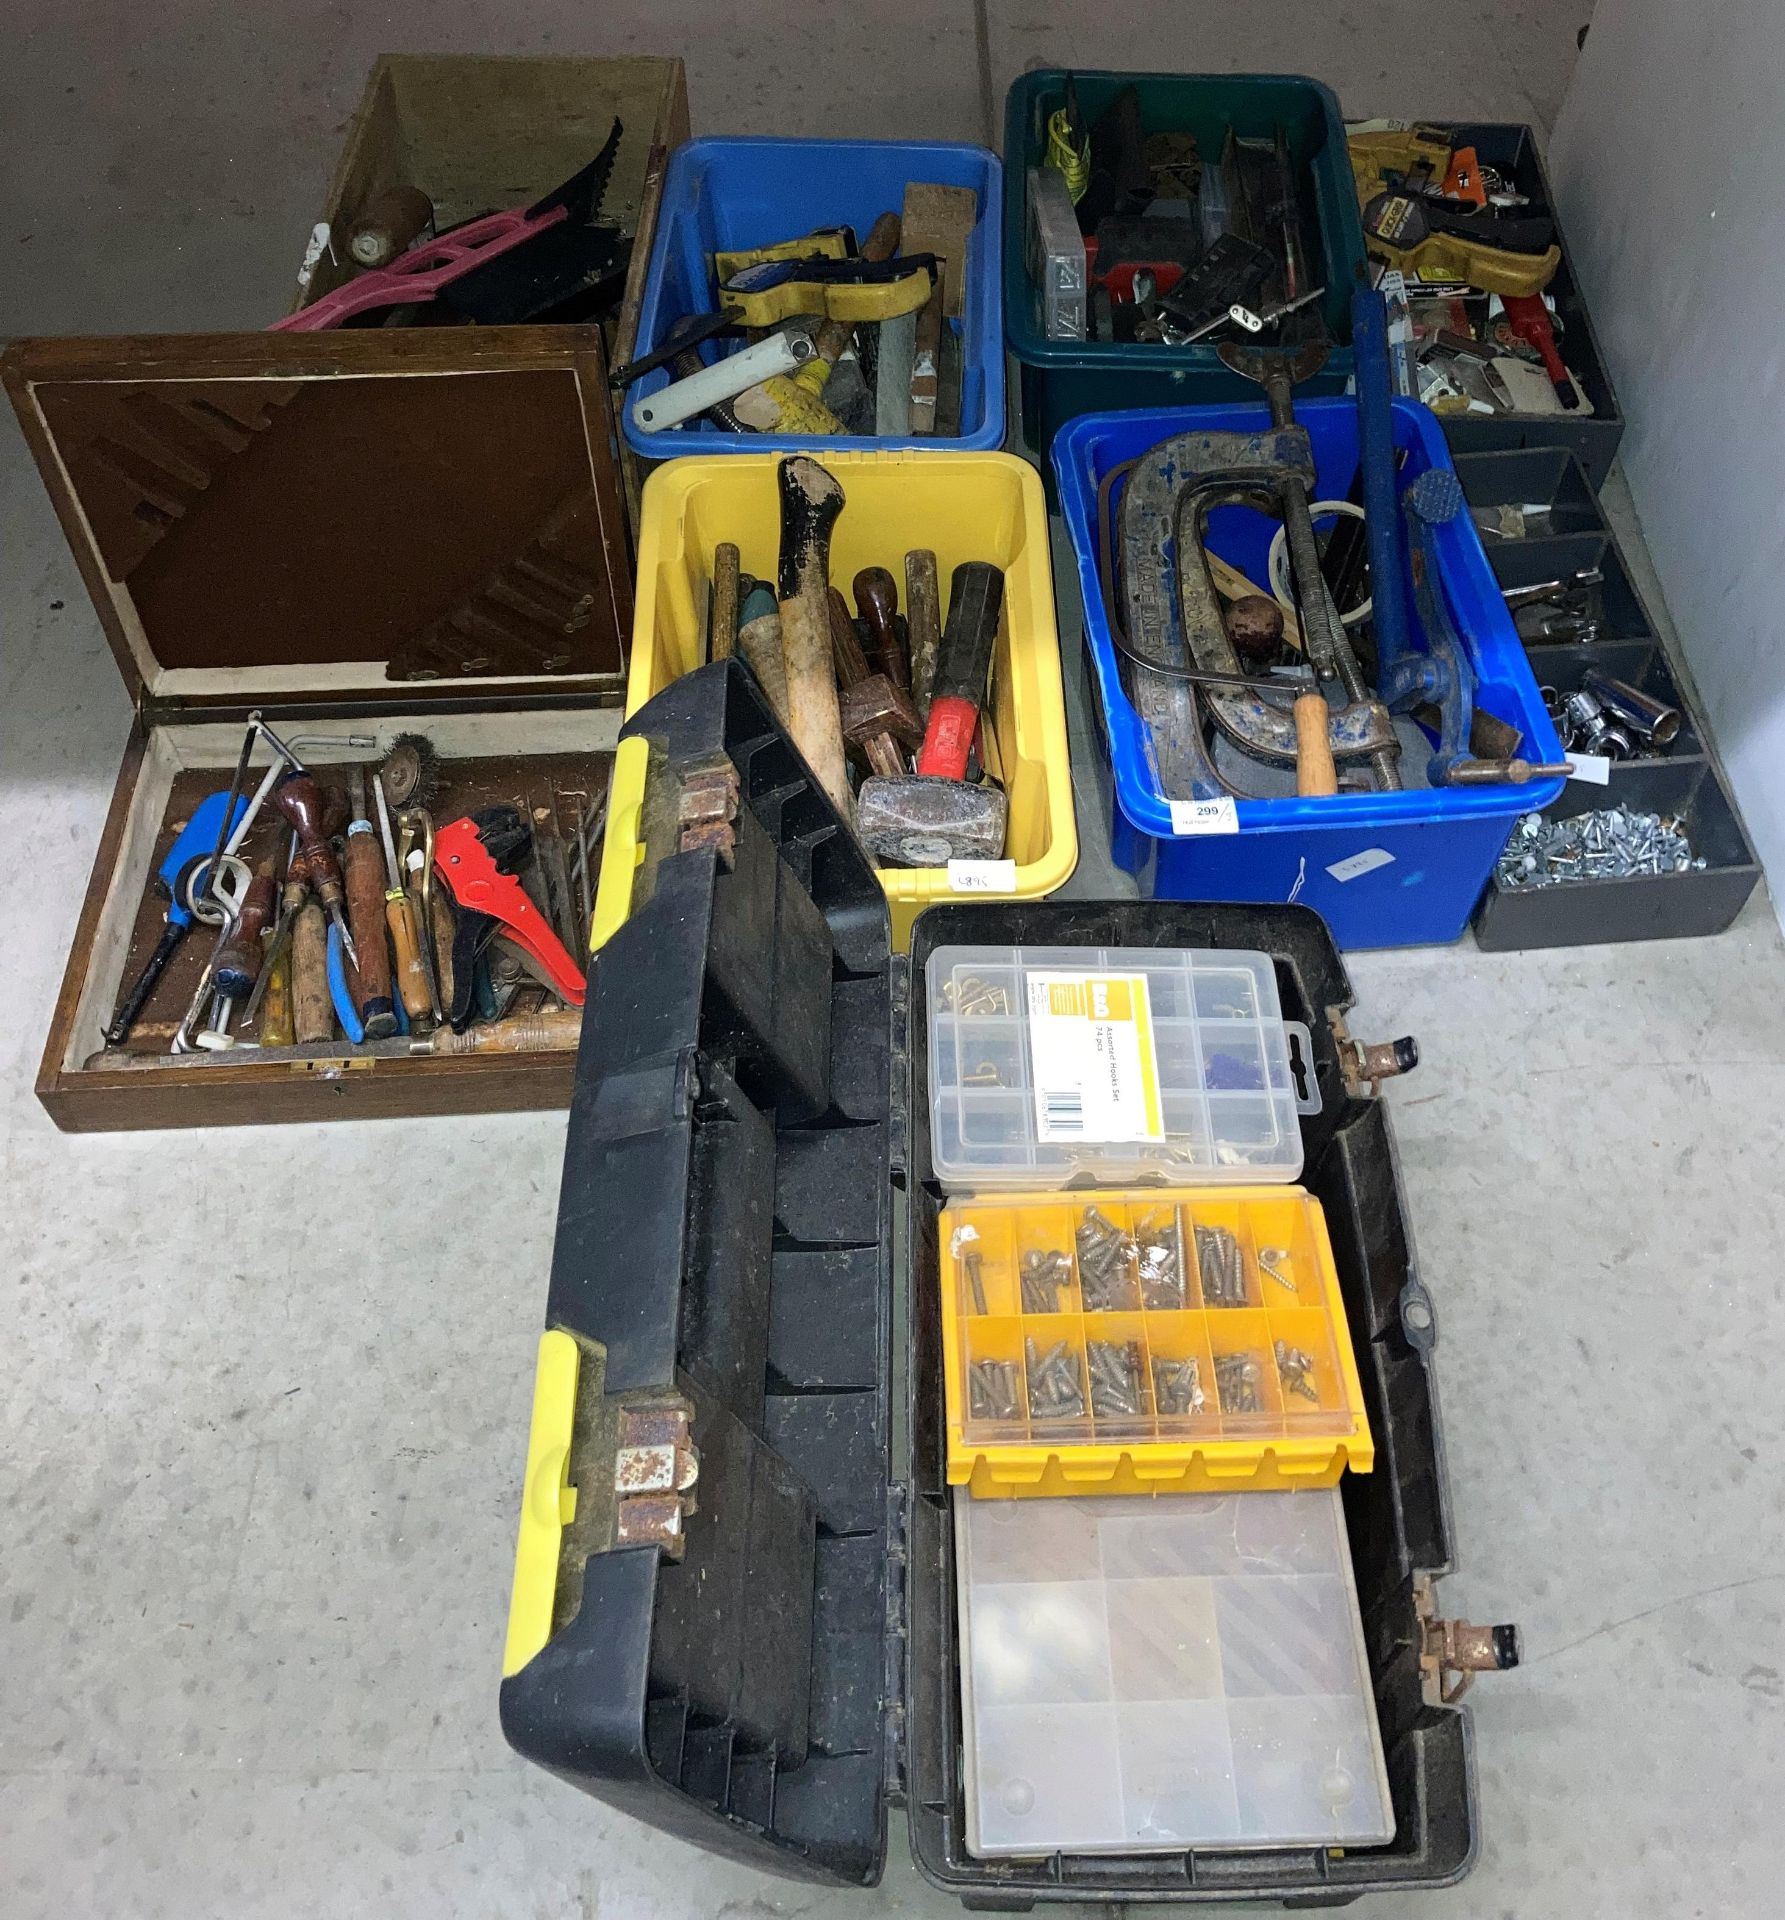 Contents to 8 x boxes and tool box - assorted hand tools, G-clamps, lump hammers, sockets, screws,